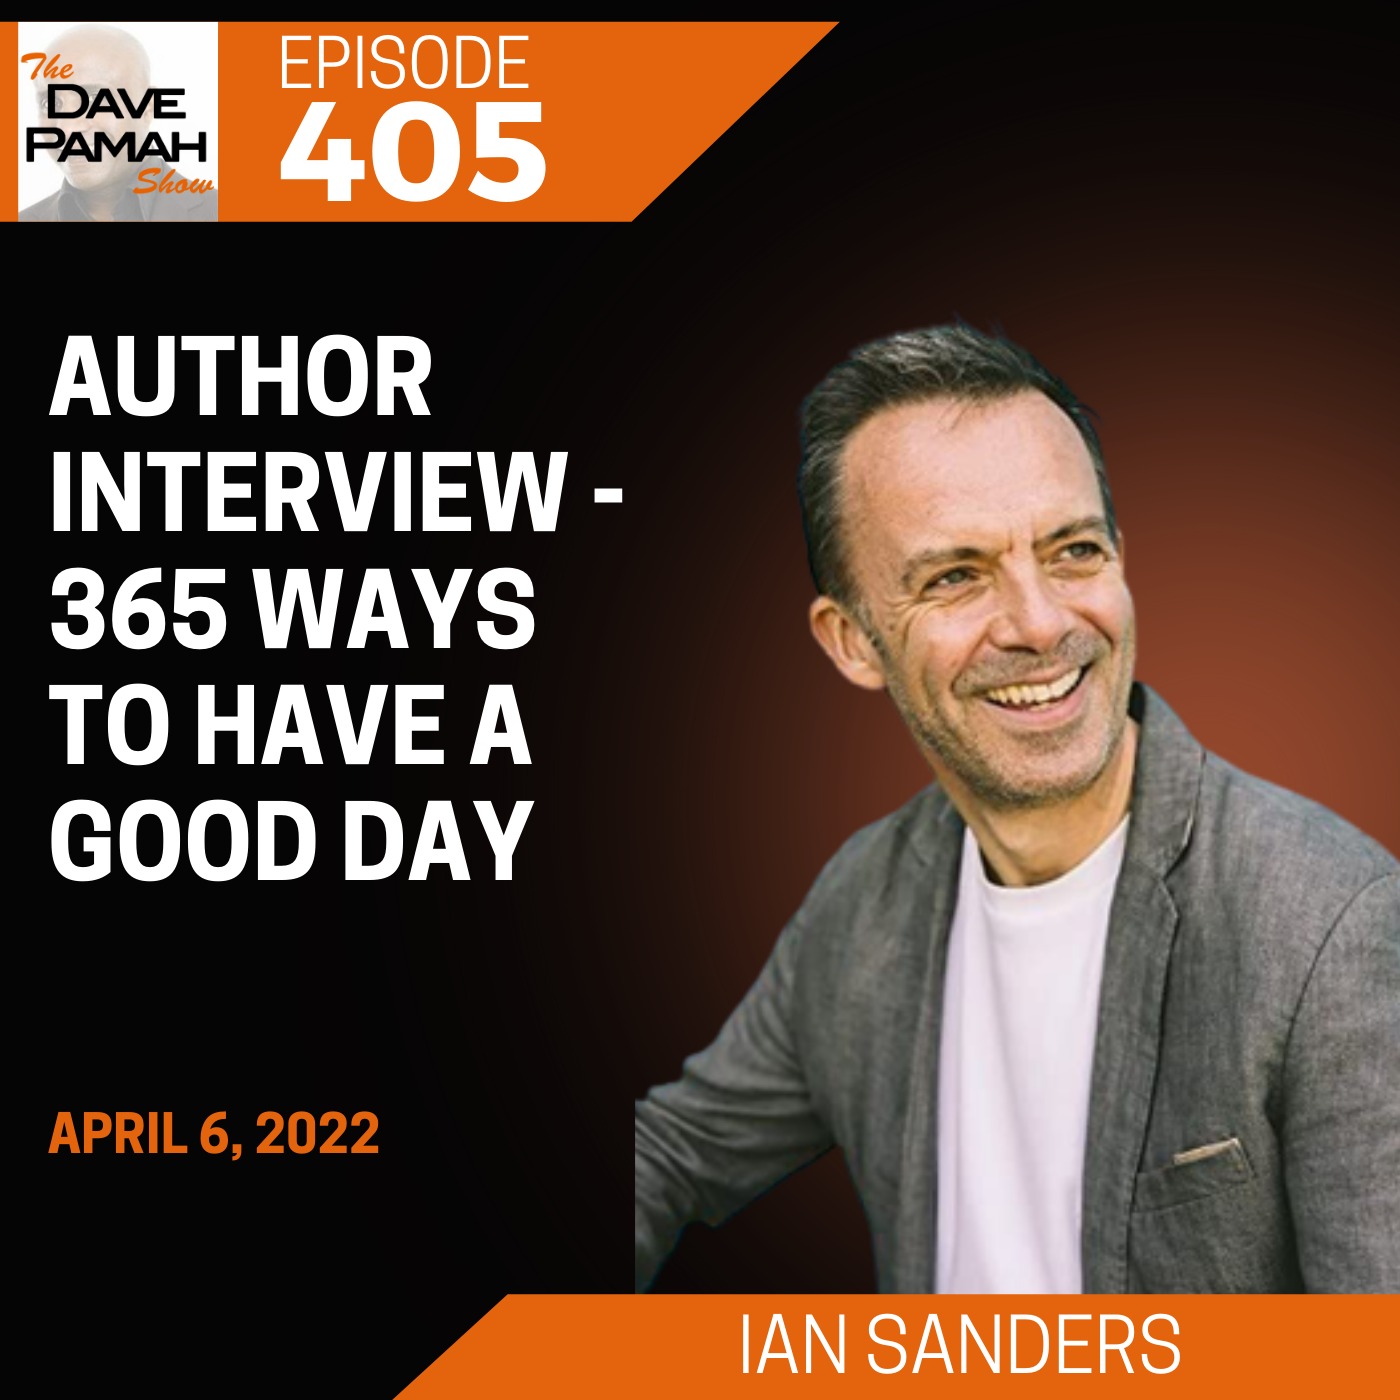 Author Interview - 365 ways to have a good day with Ian Sanders Image